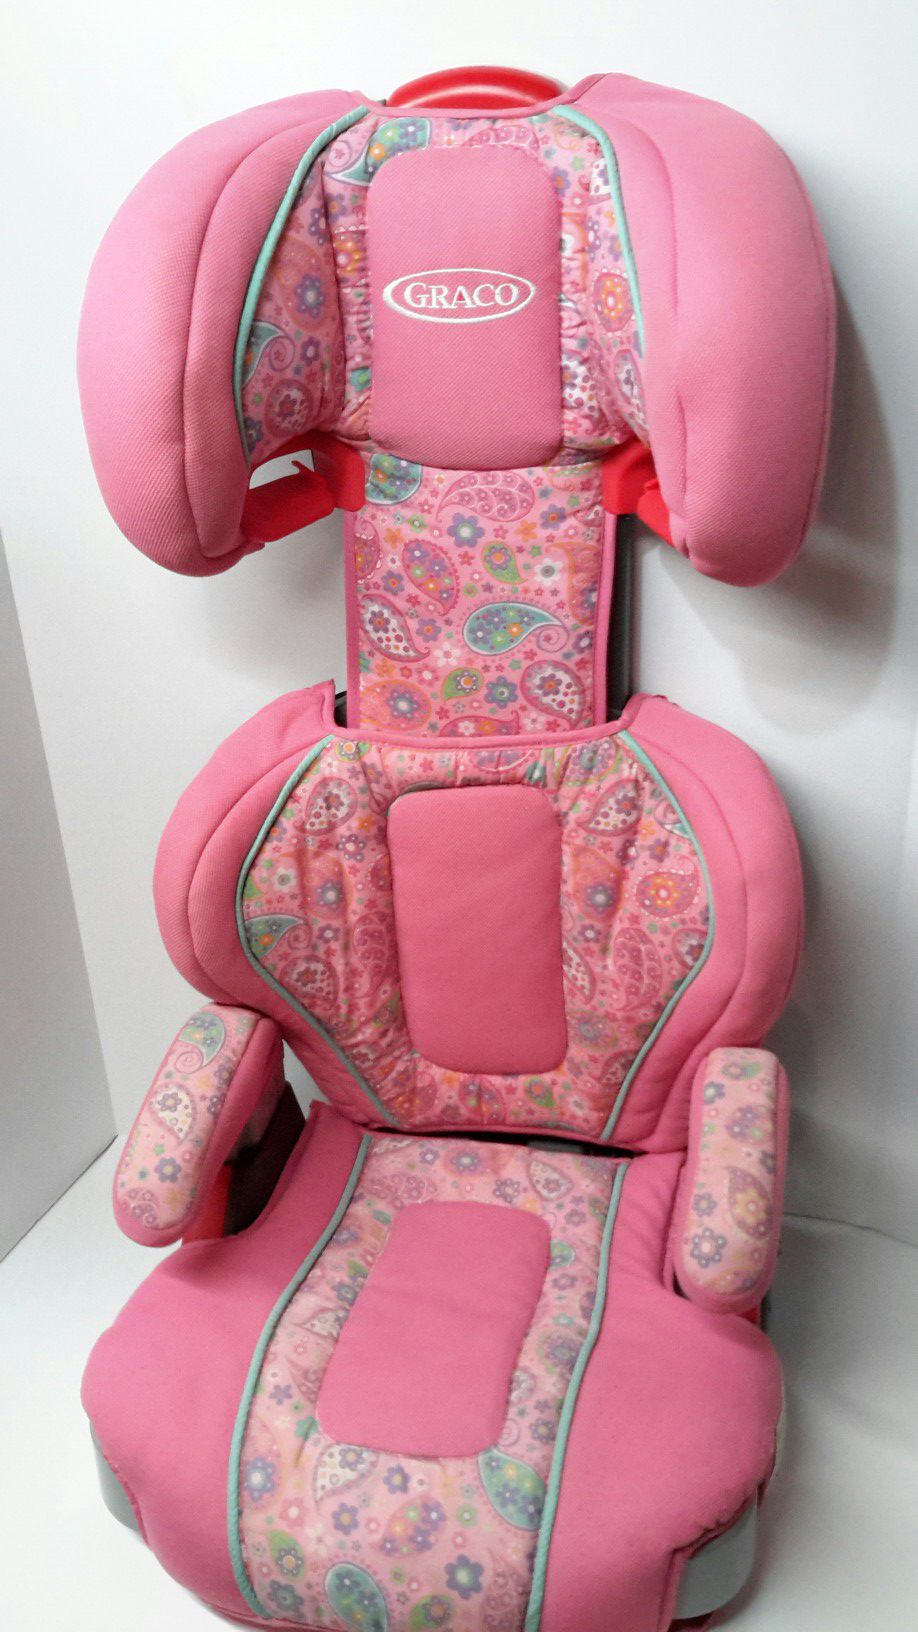 Graco TurboBooster Car Seat Booster Chair Pink